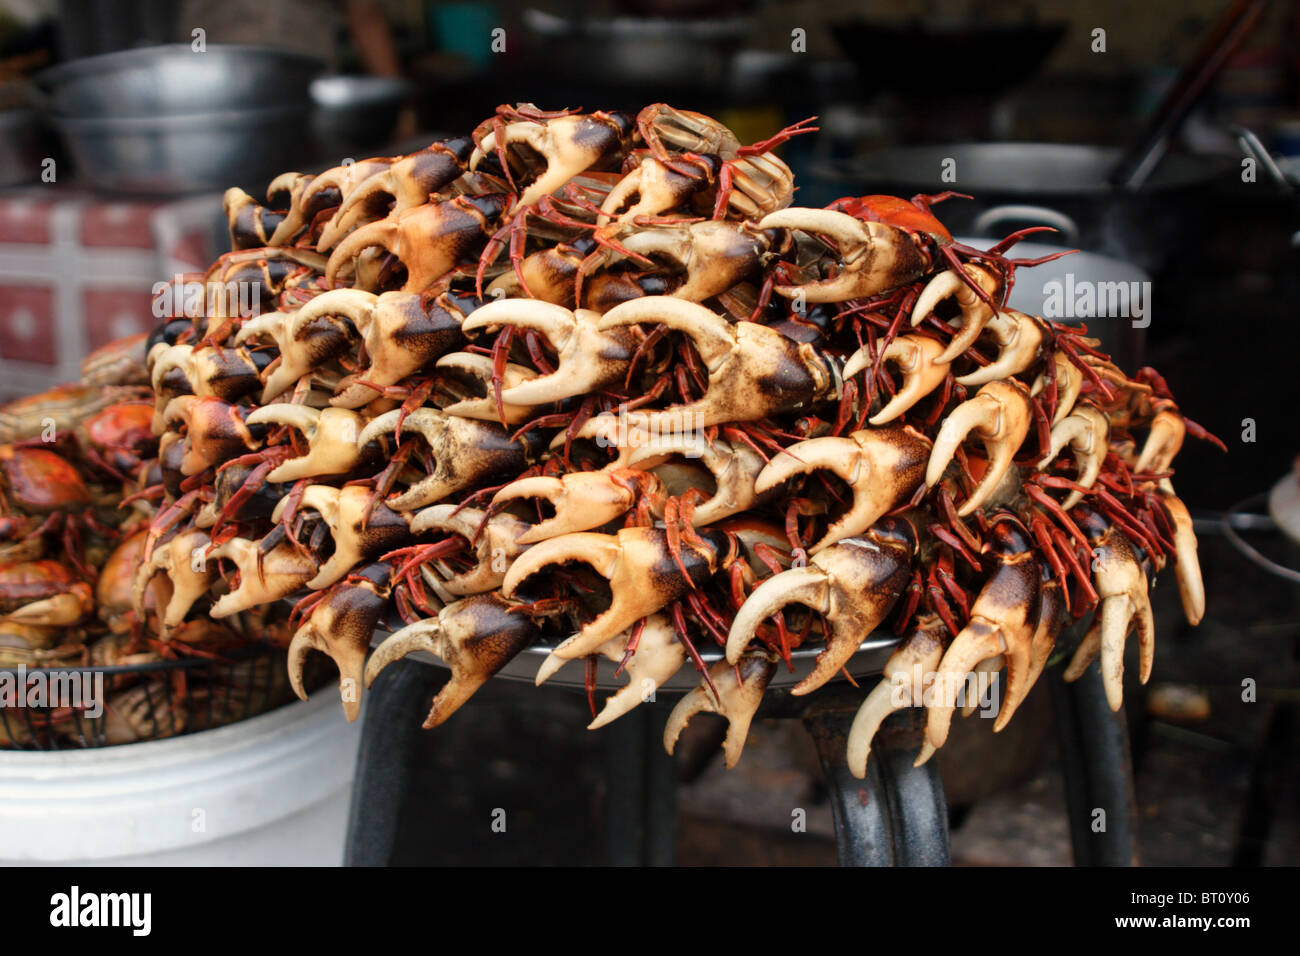 A serving of fresh crab rests on a food vendor's cart awaiting customers in Phnom Penh, Cambodia. Stock Photo